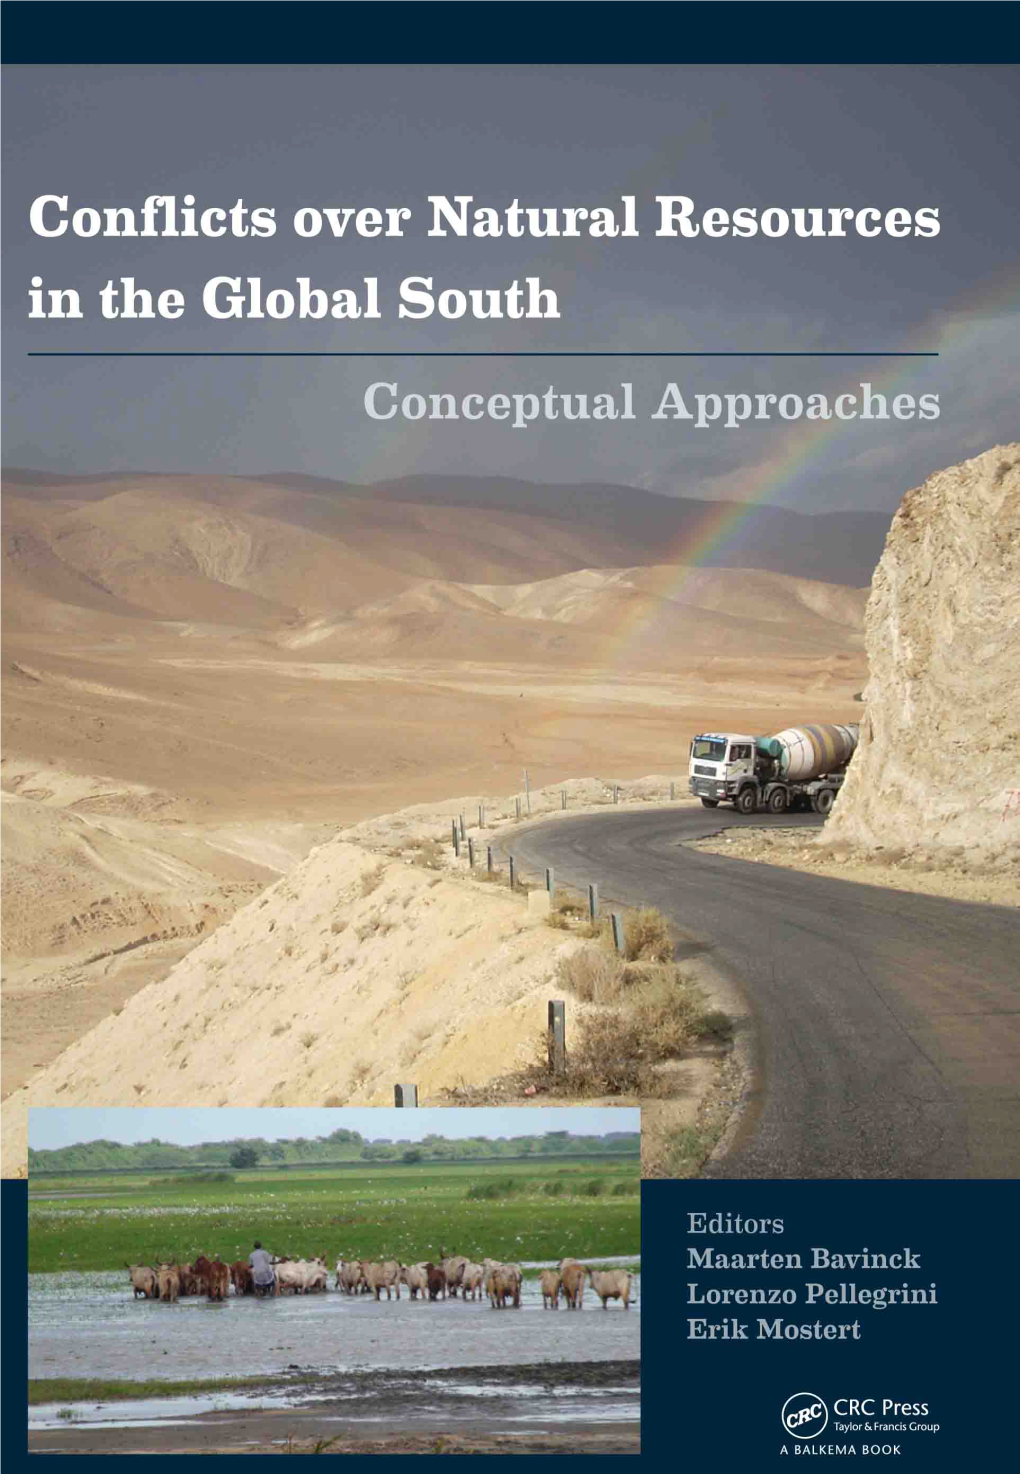 Conflicts Over Natural Resources in the Global South – Conceptual Approaches